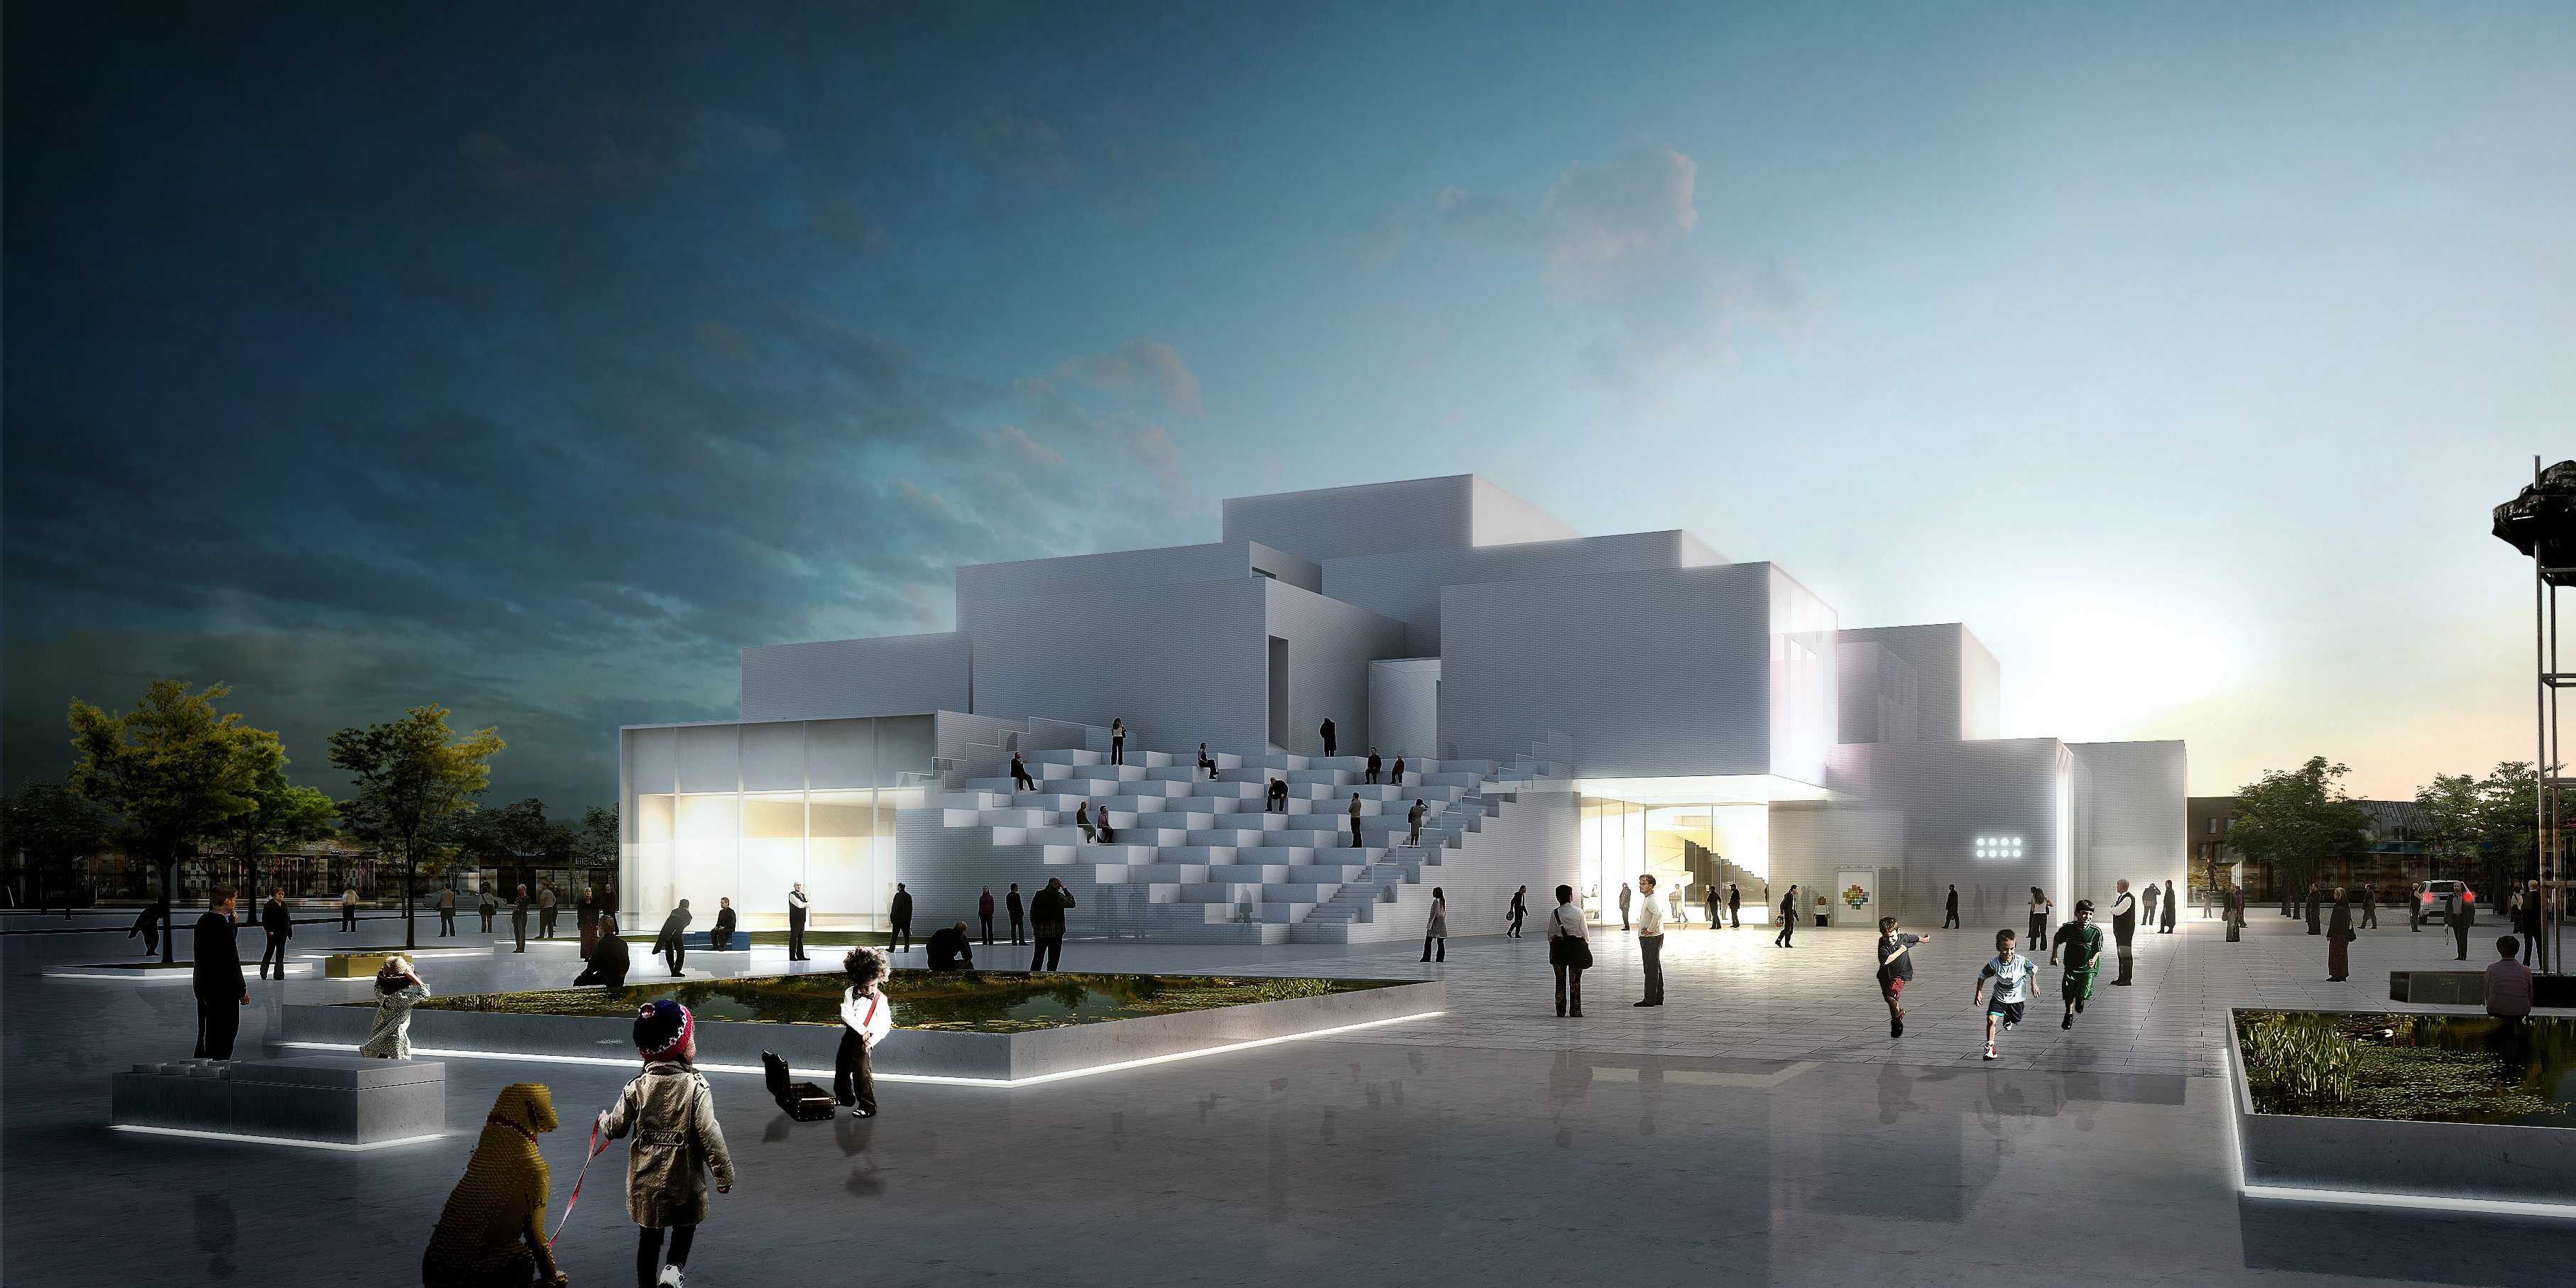 Concept image for the Lego House in Billund, Denmark, courtesy The Lego Group